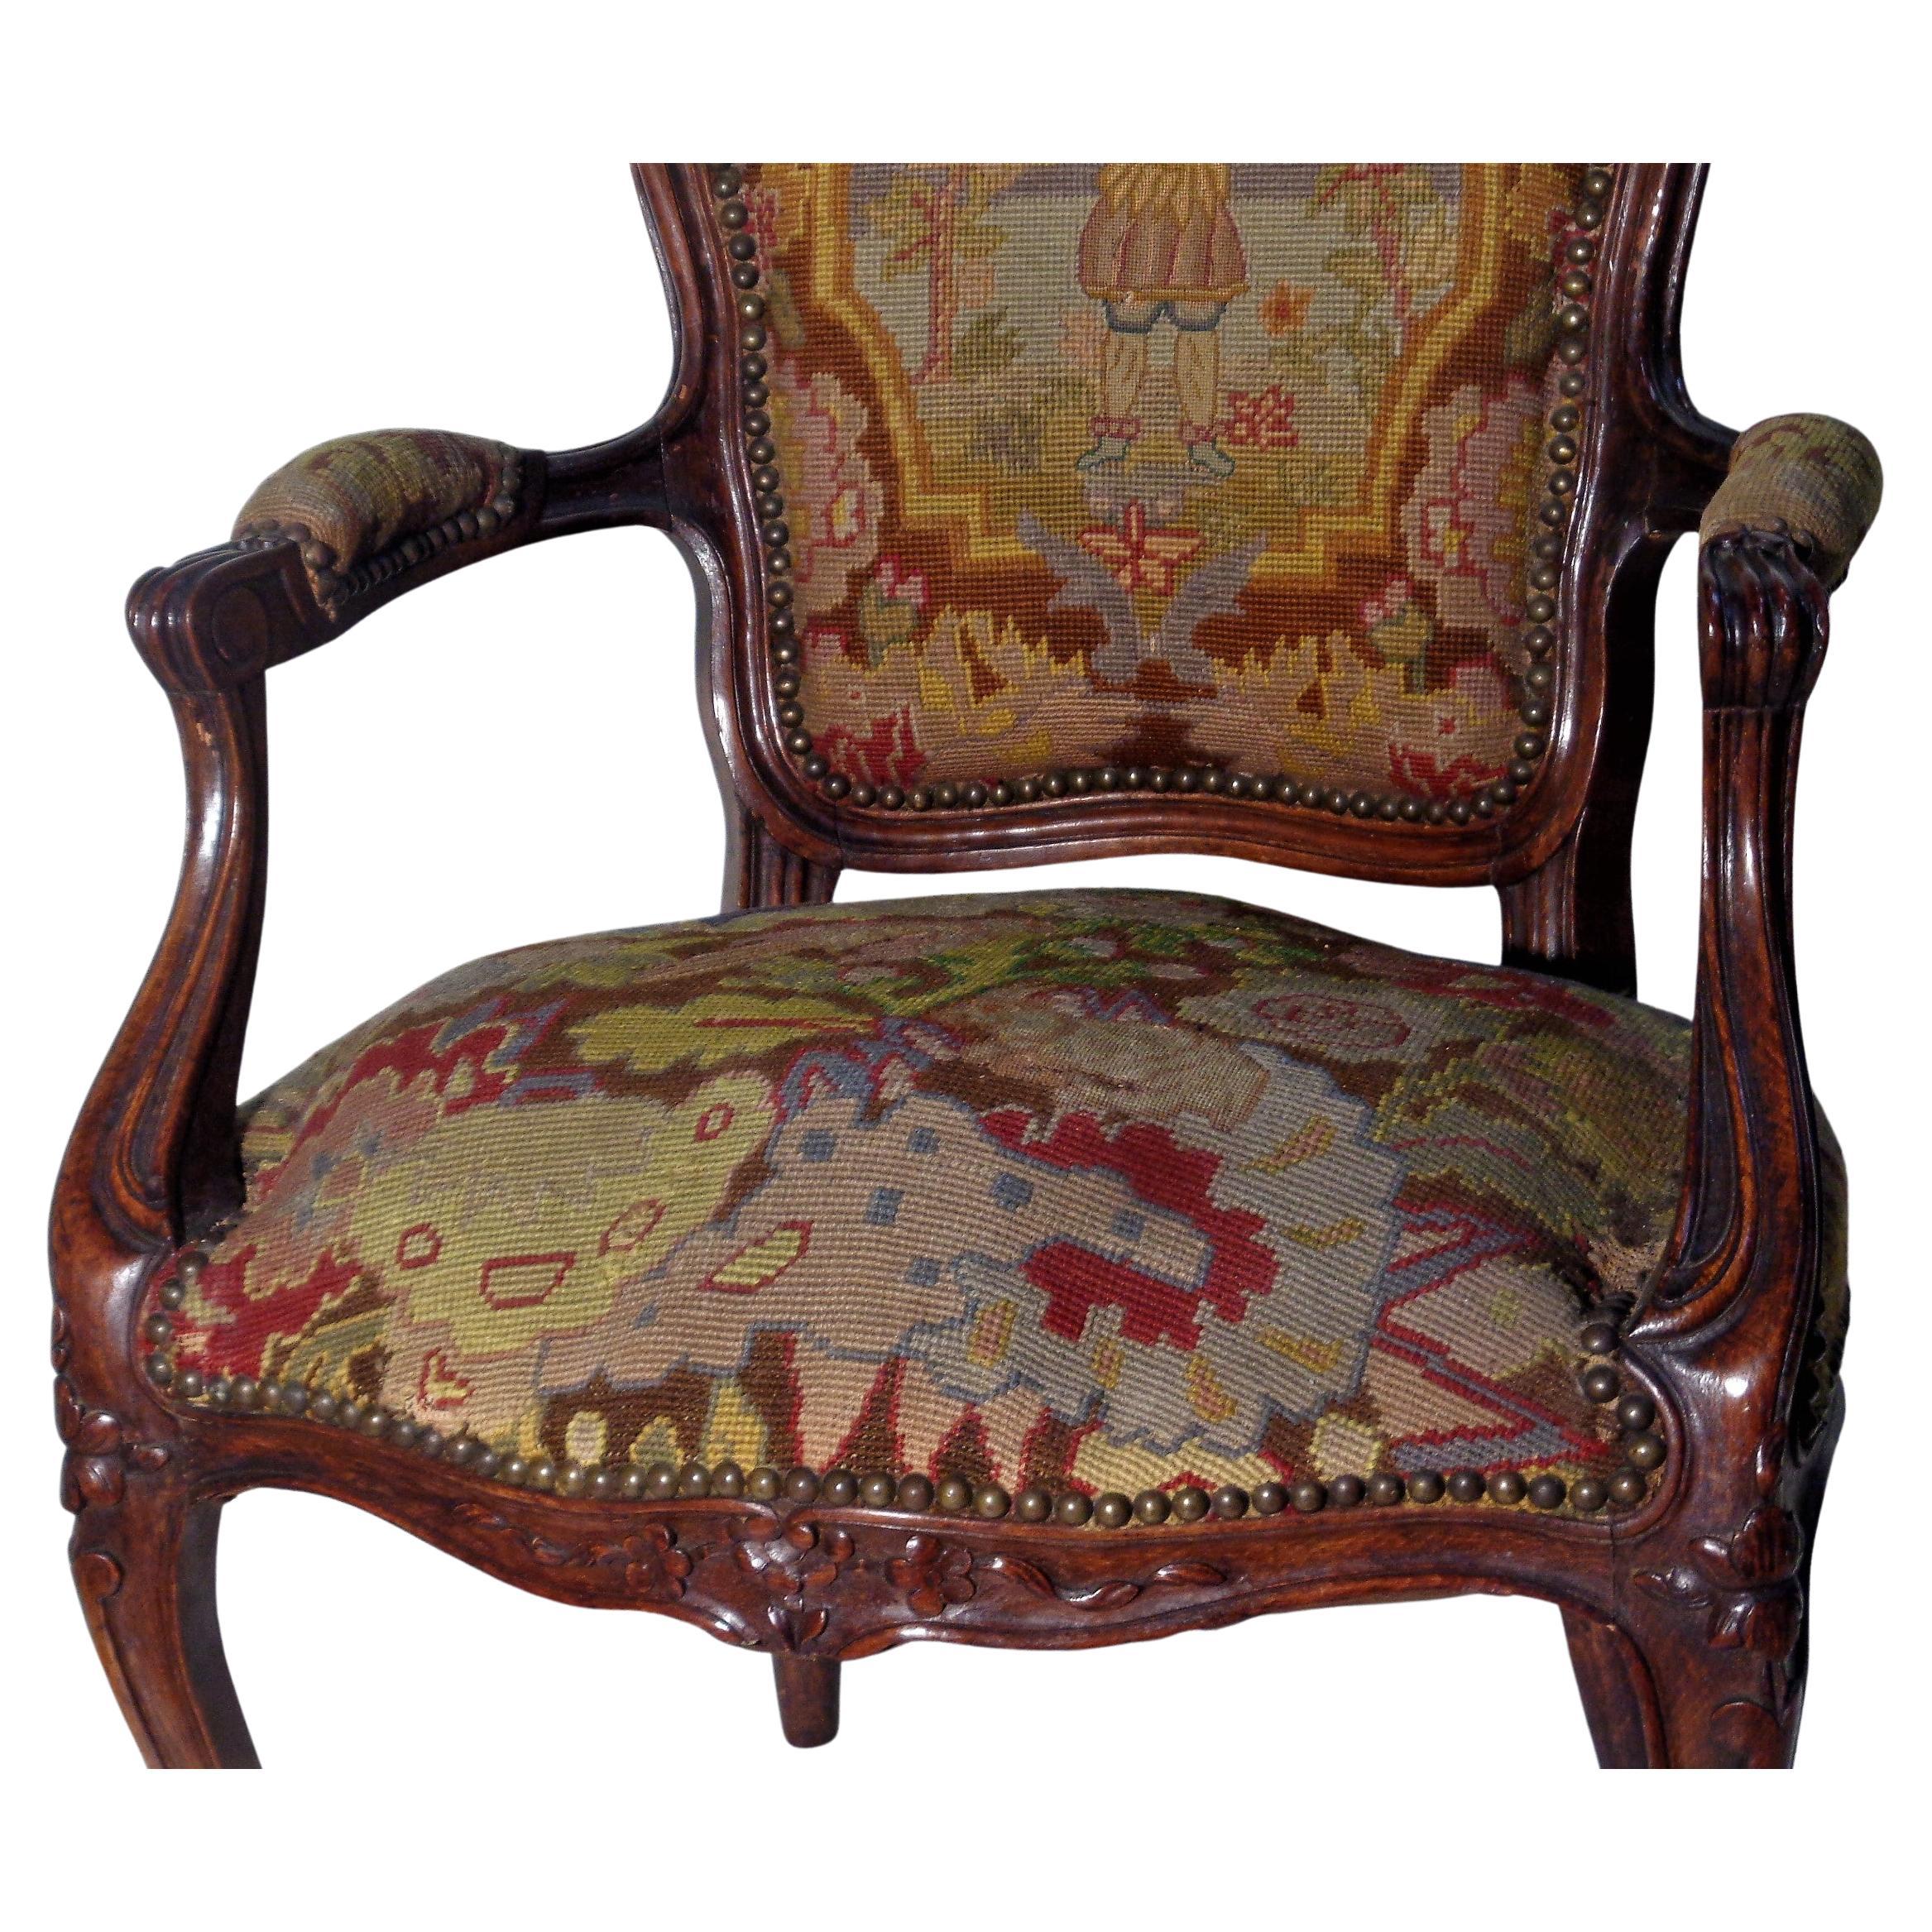 19th Century Louis XV Style Carved Beech Wood Fauteuil Grospoint Tapestry For Sale 8